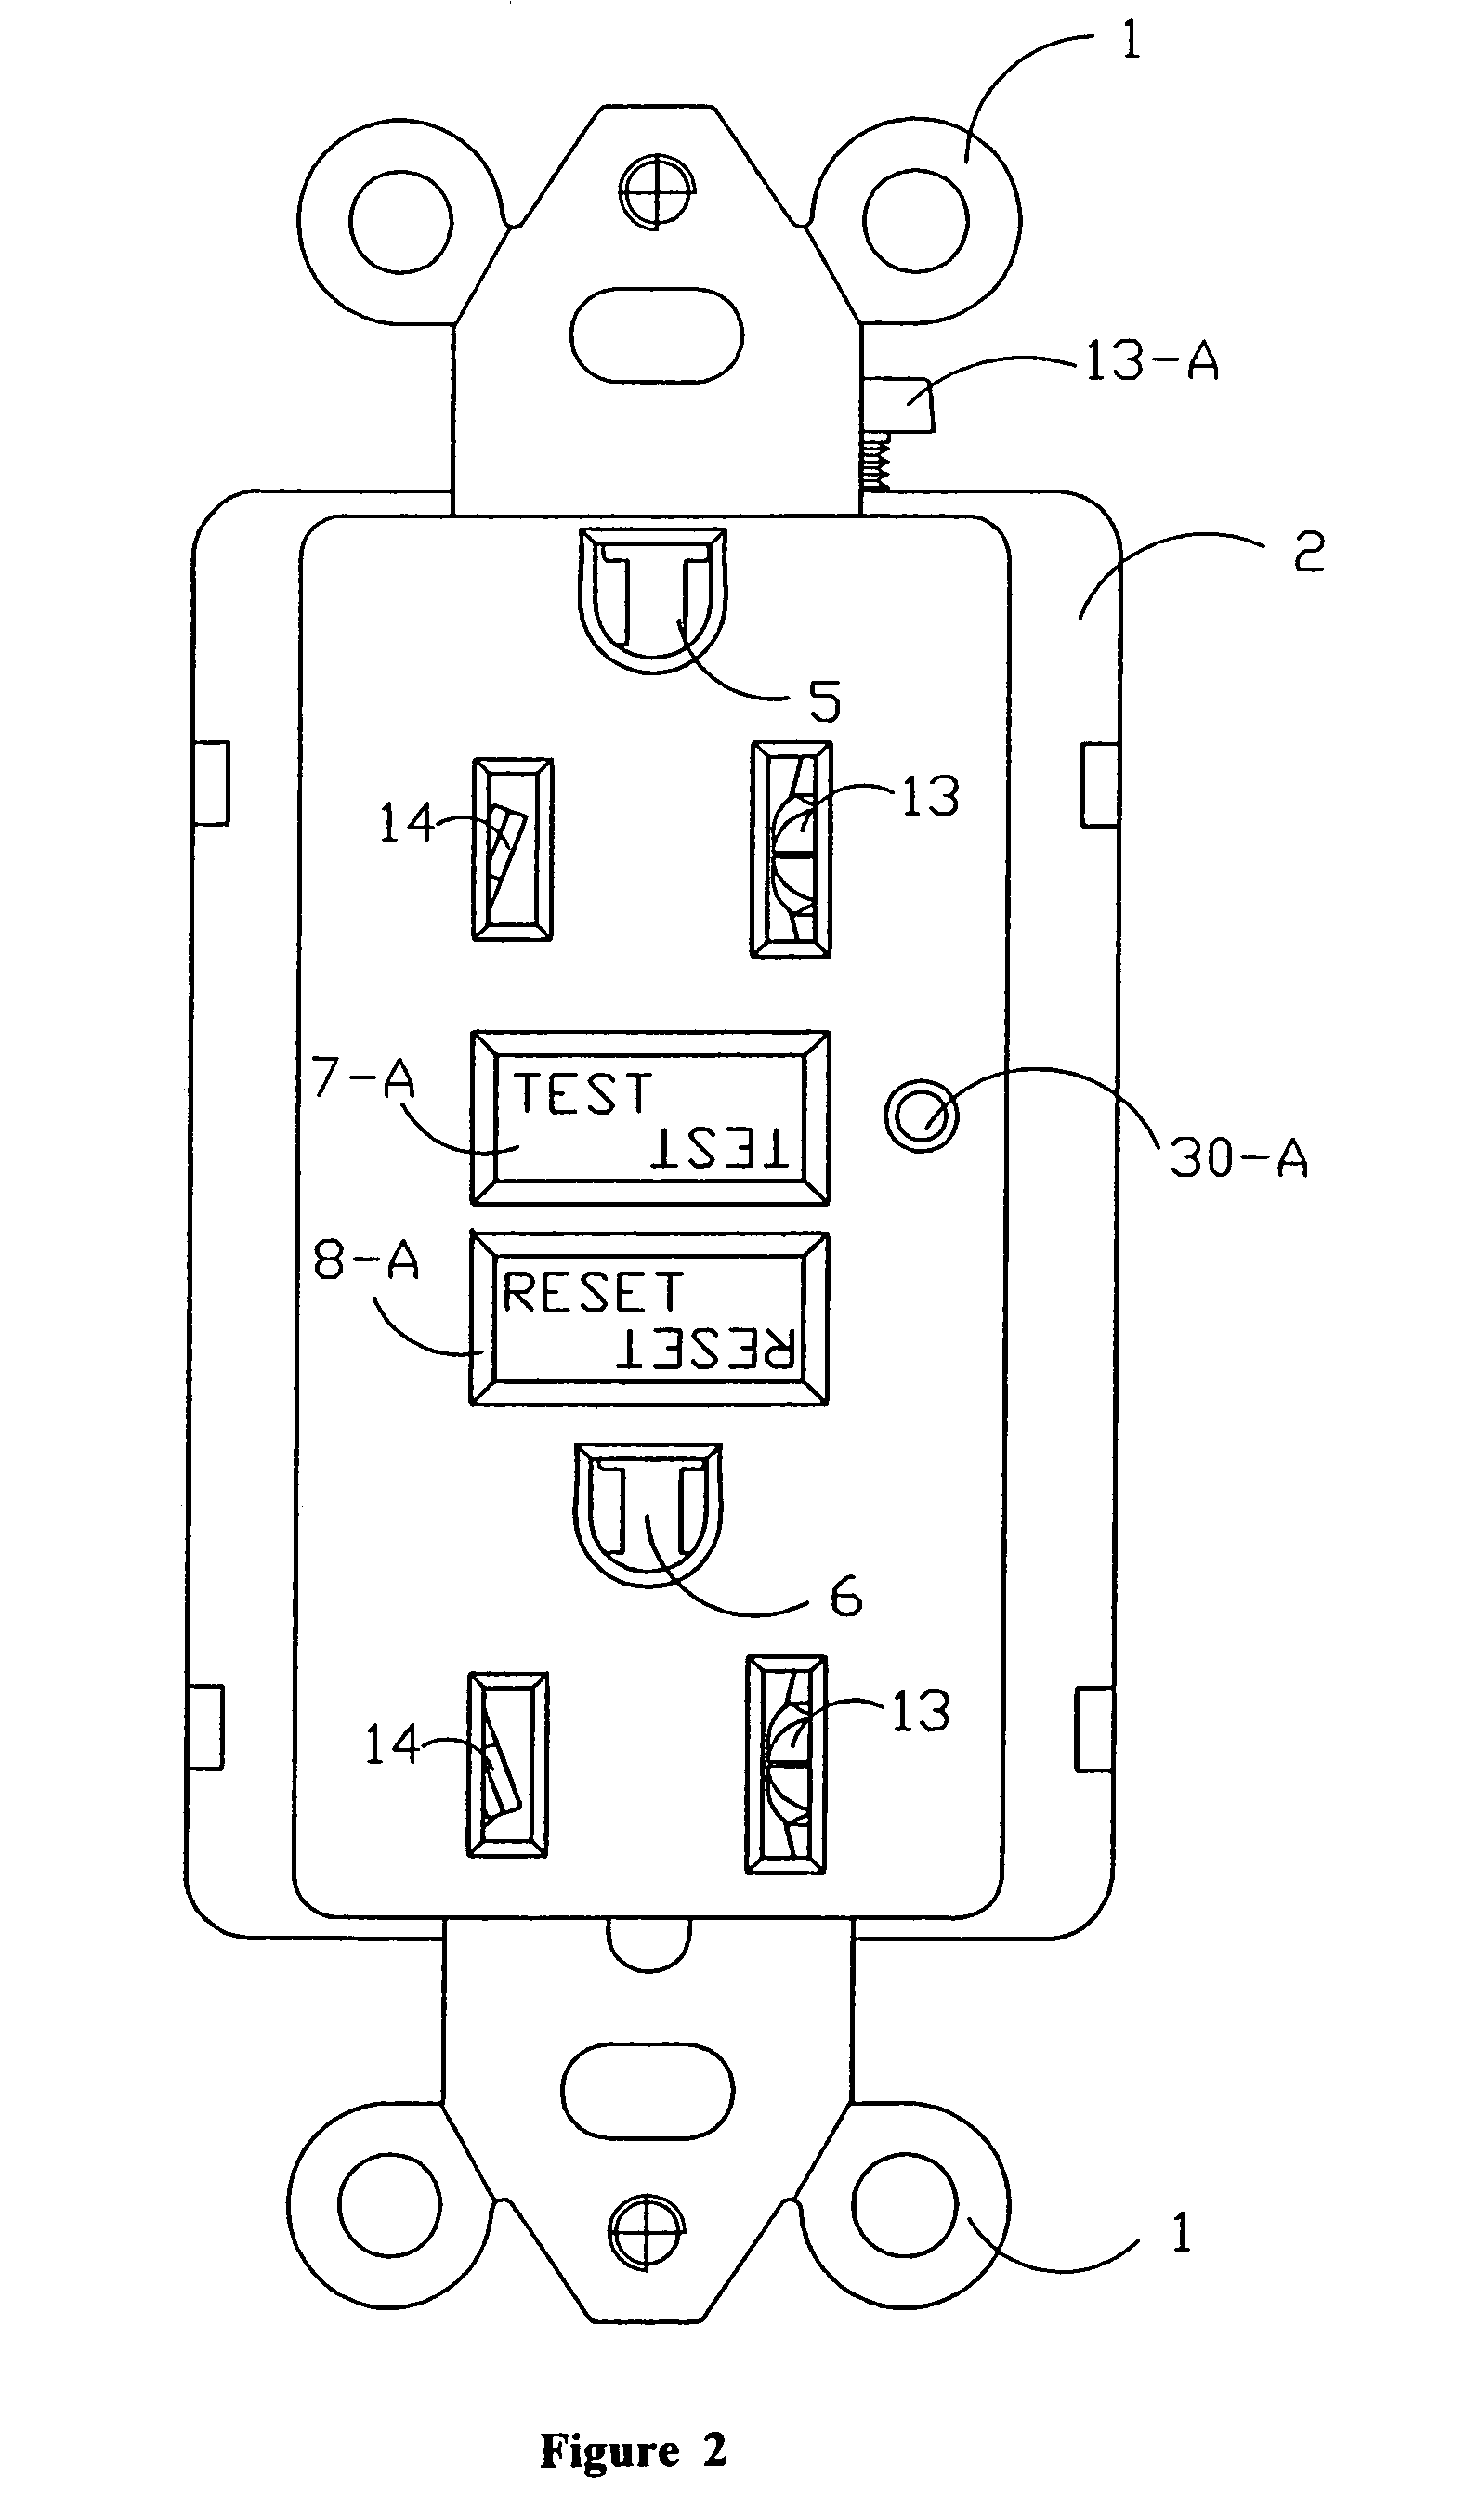 Circuit interrupting device with automatic end of life test